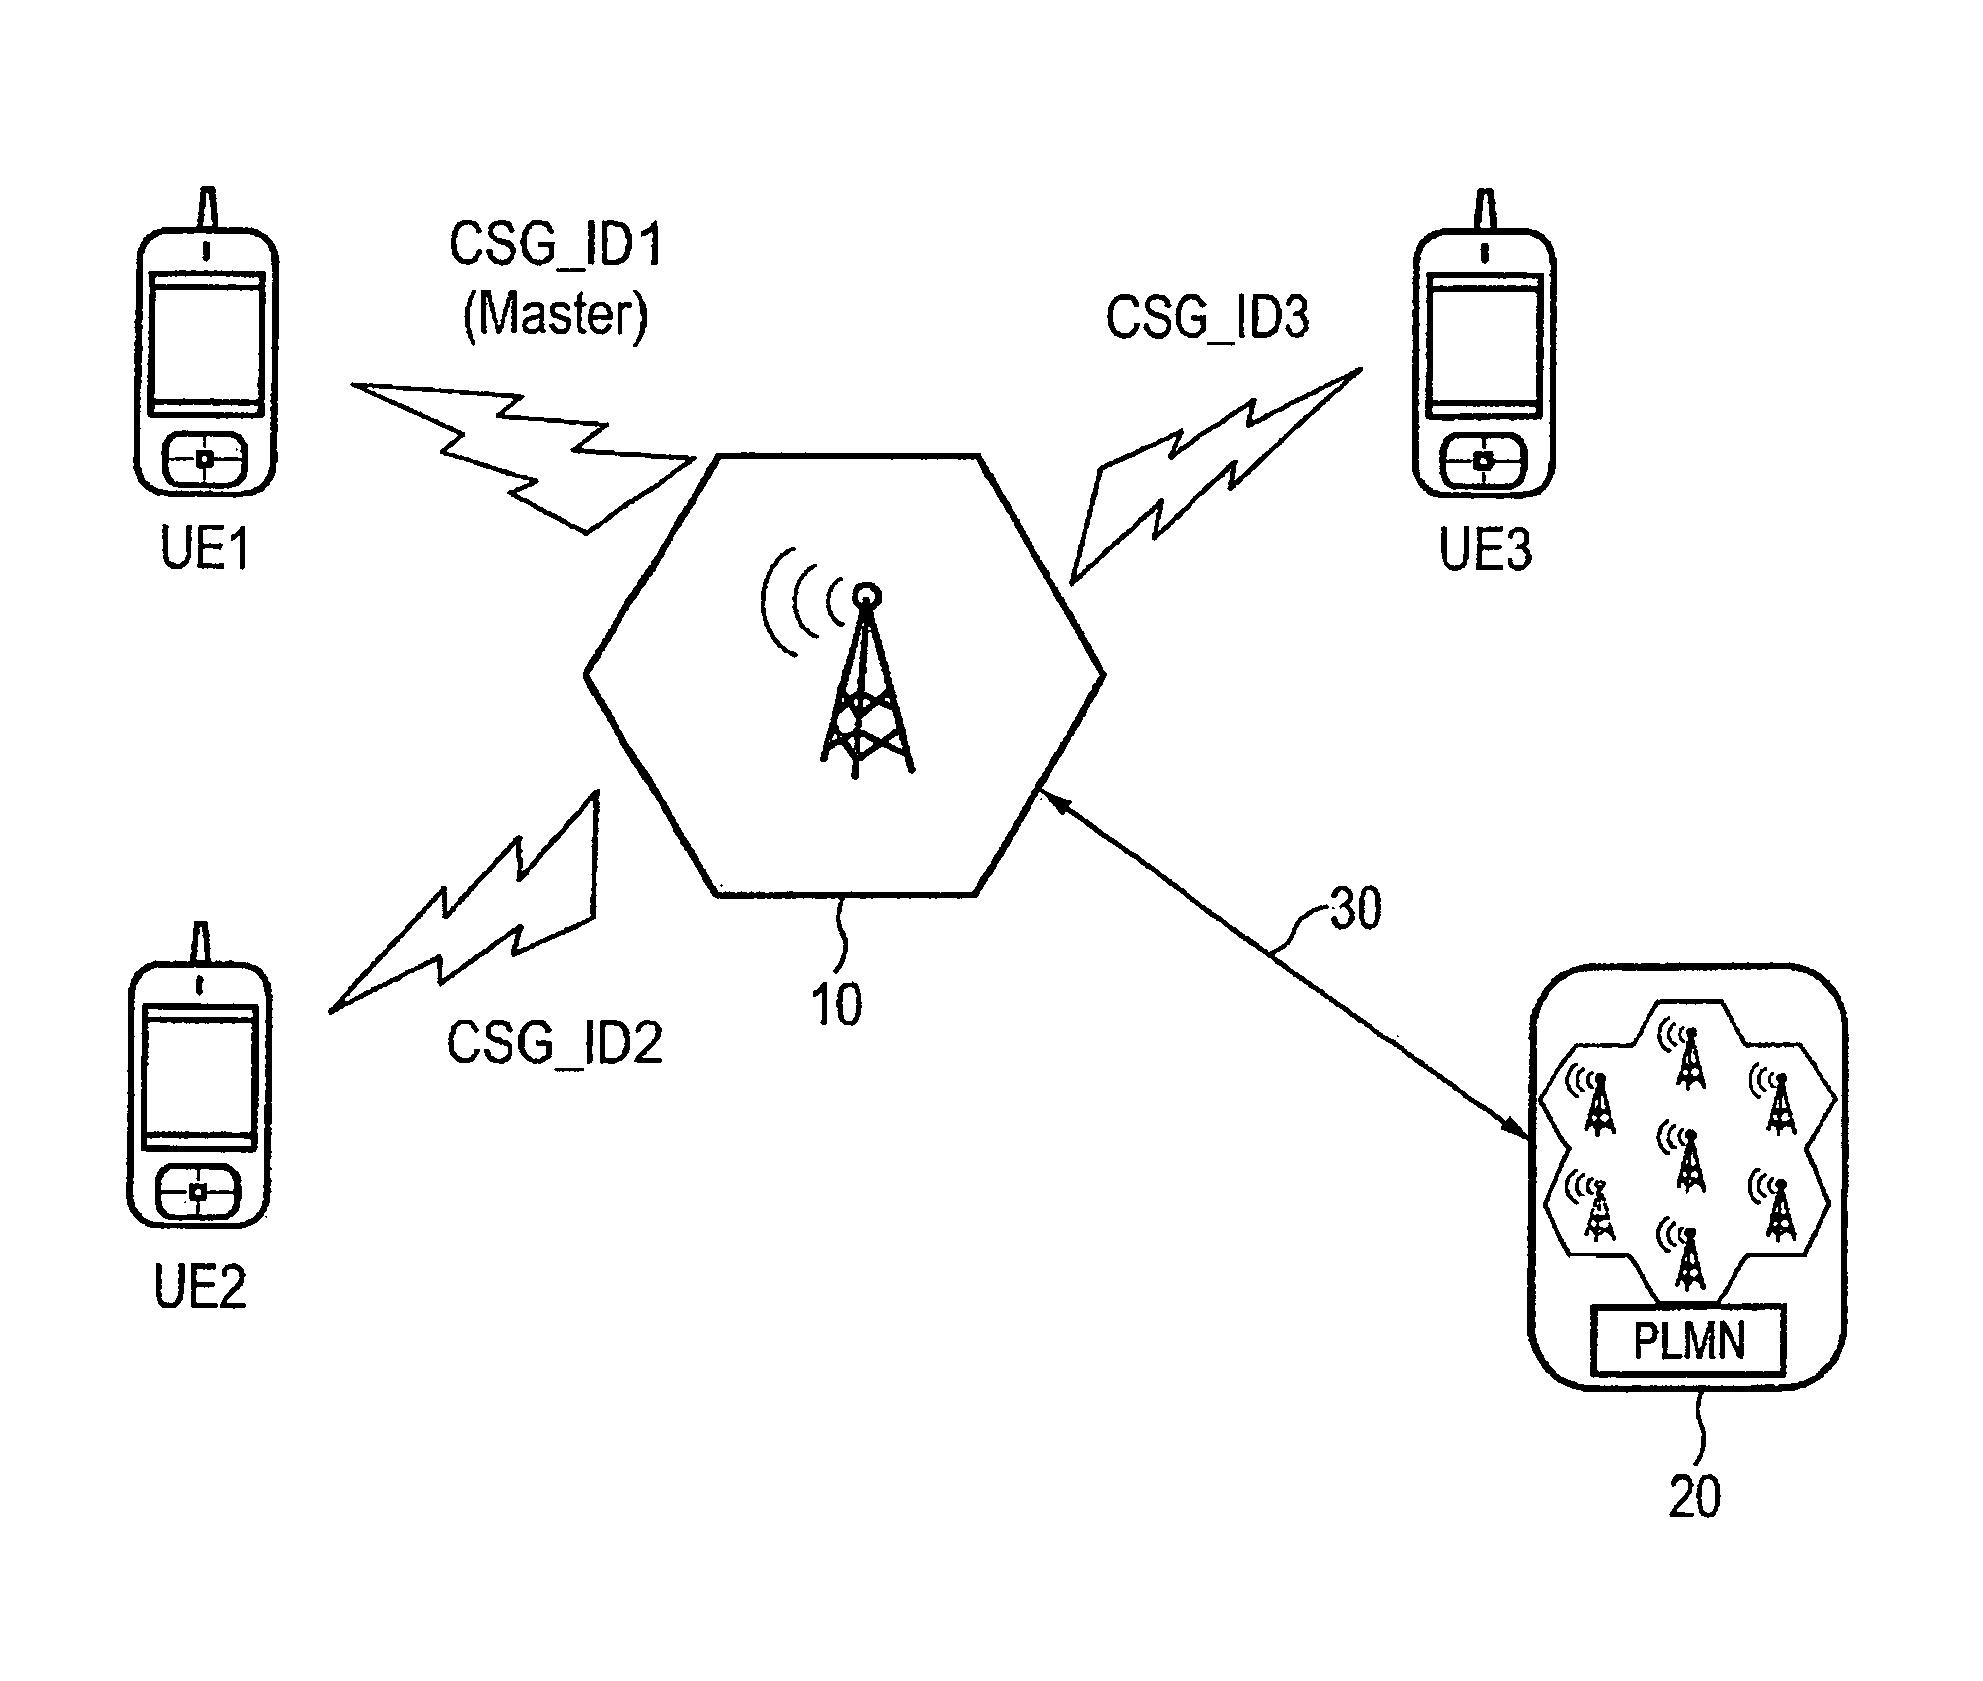 Method for operating a closed subscriber group (CSG) cell for open network access